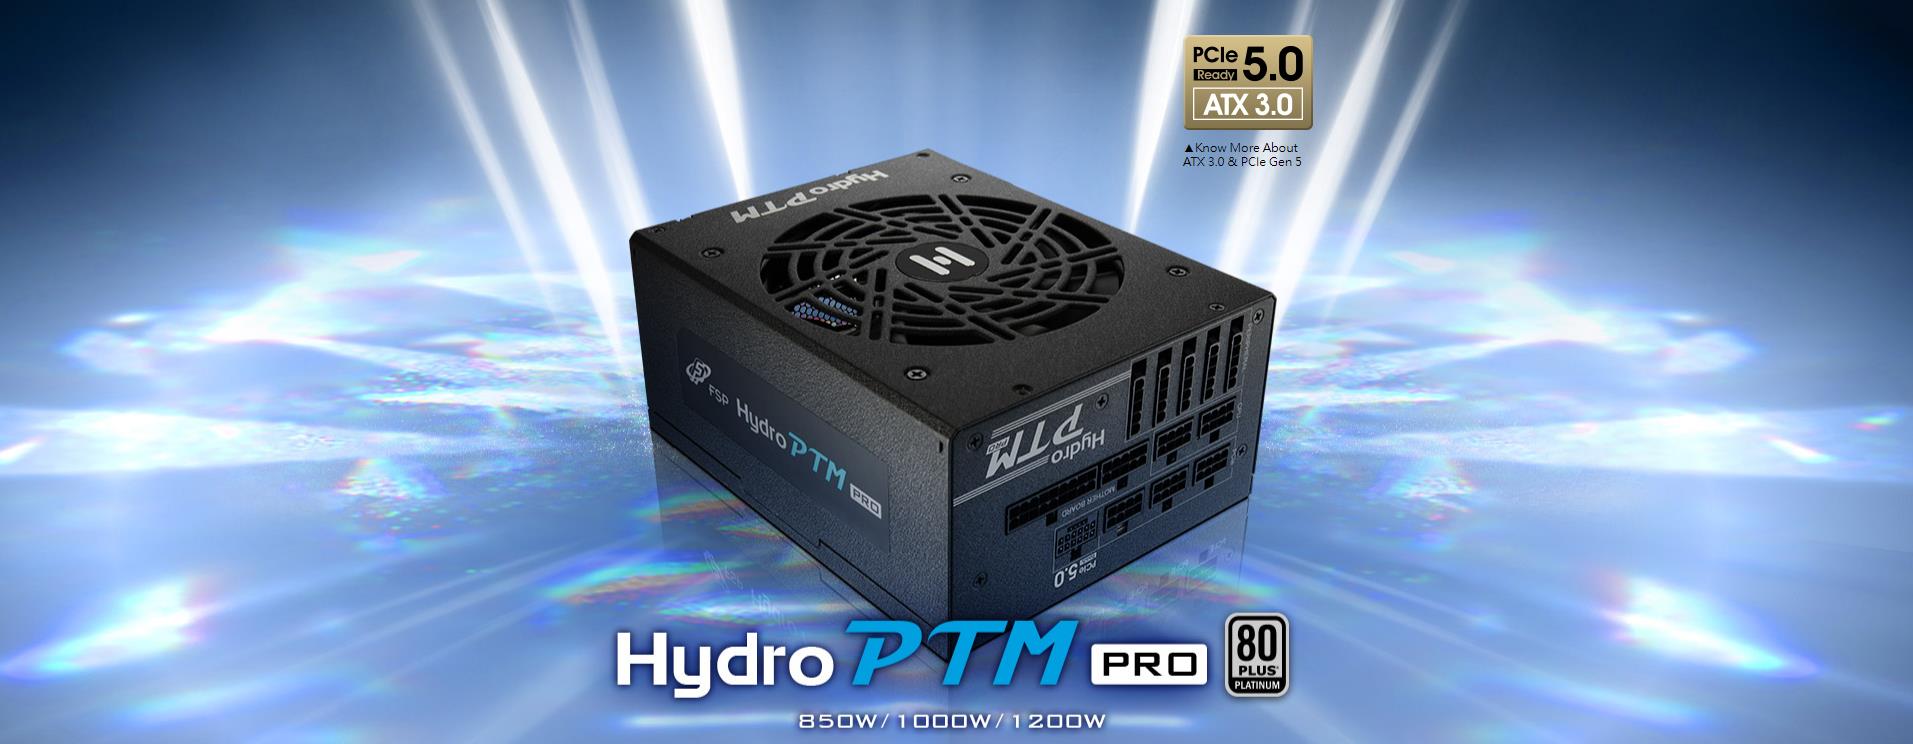 A large marketing image providing additional information about the product FSP Hydro PTM PRO 1000W Platinum PCIe 5.0 ATX Modular PSU - Additional alt info not provided